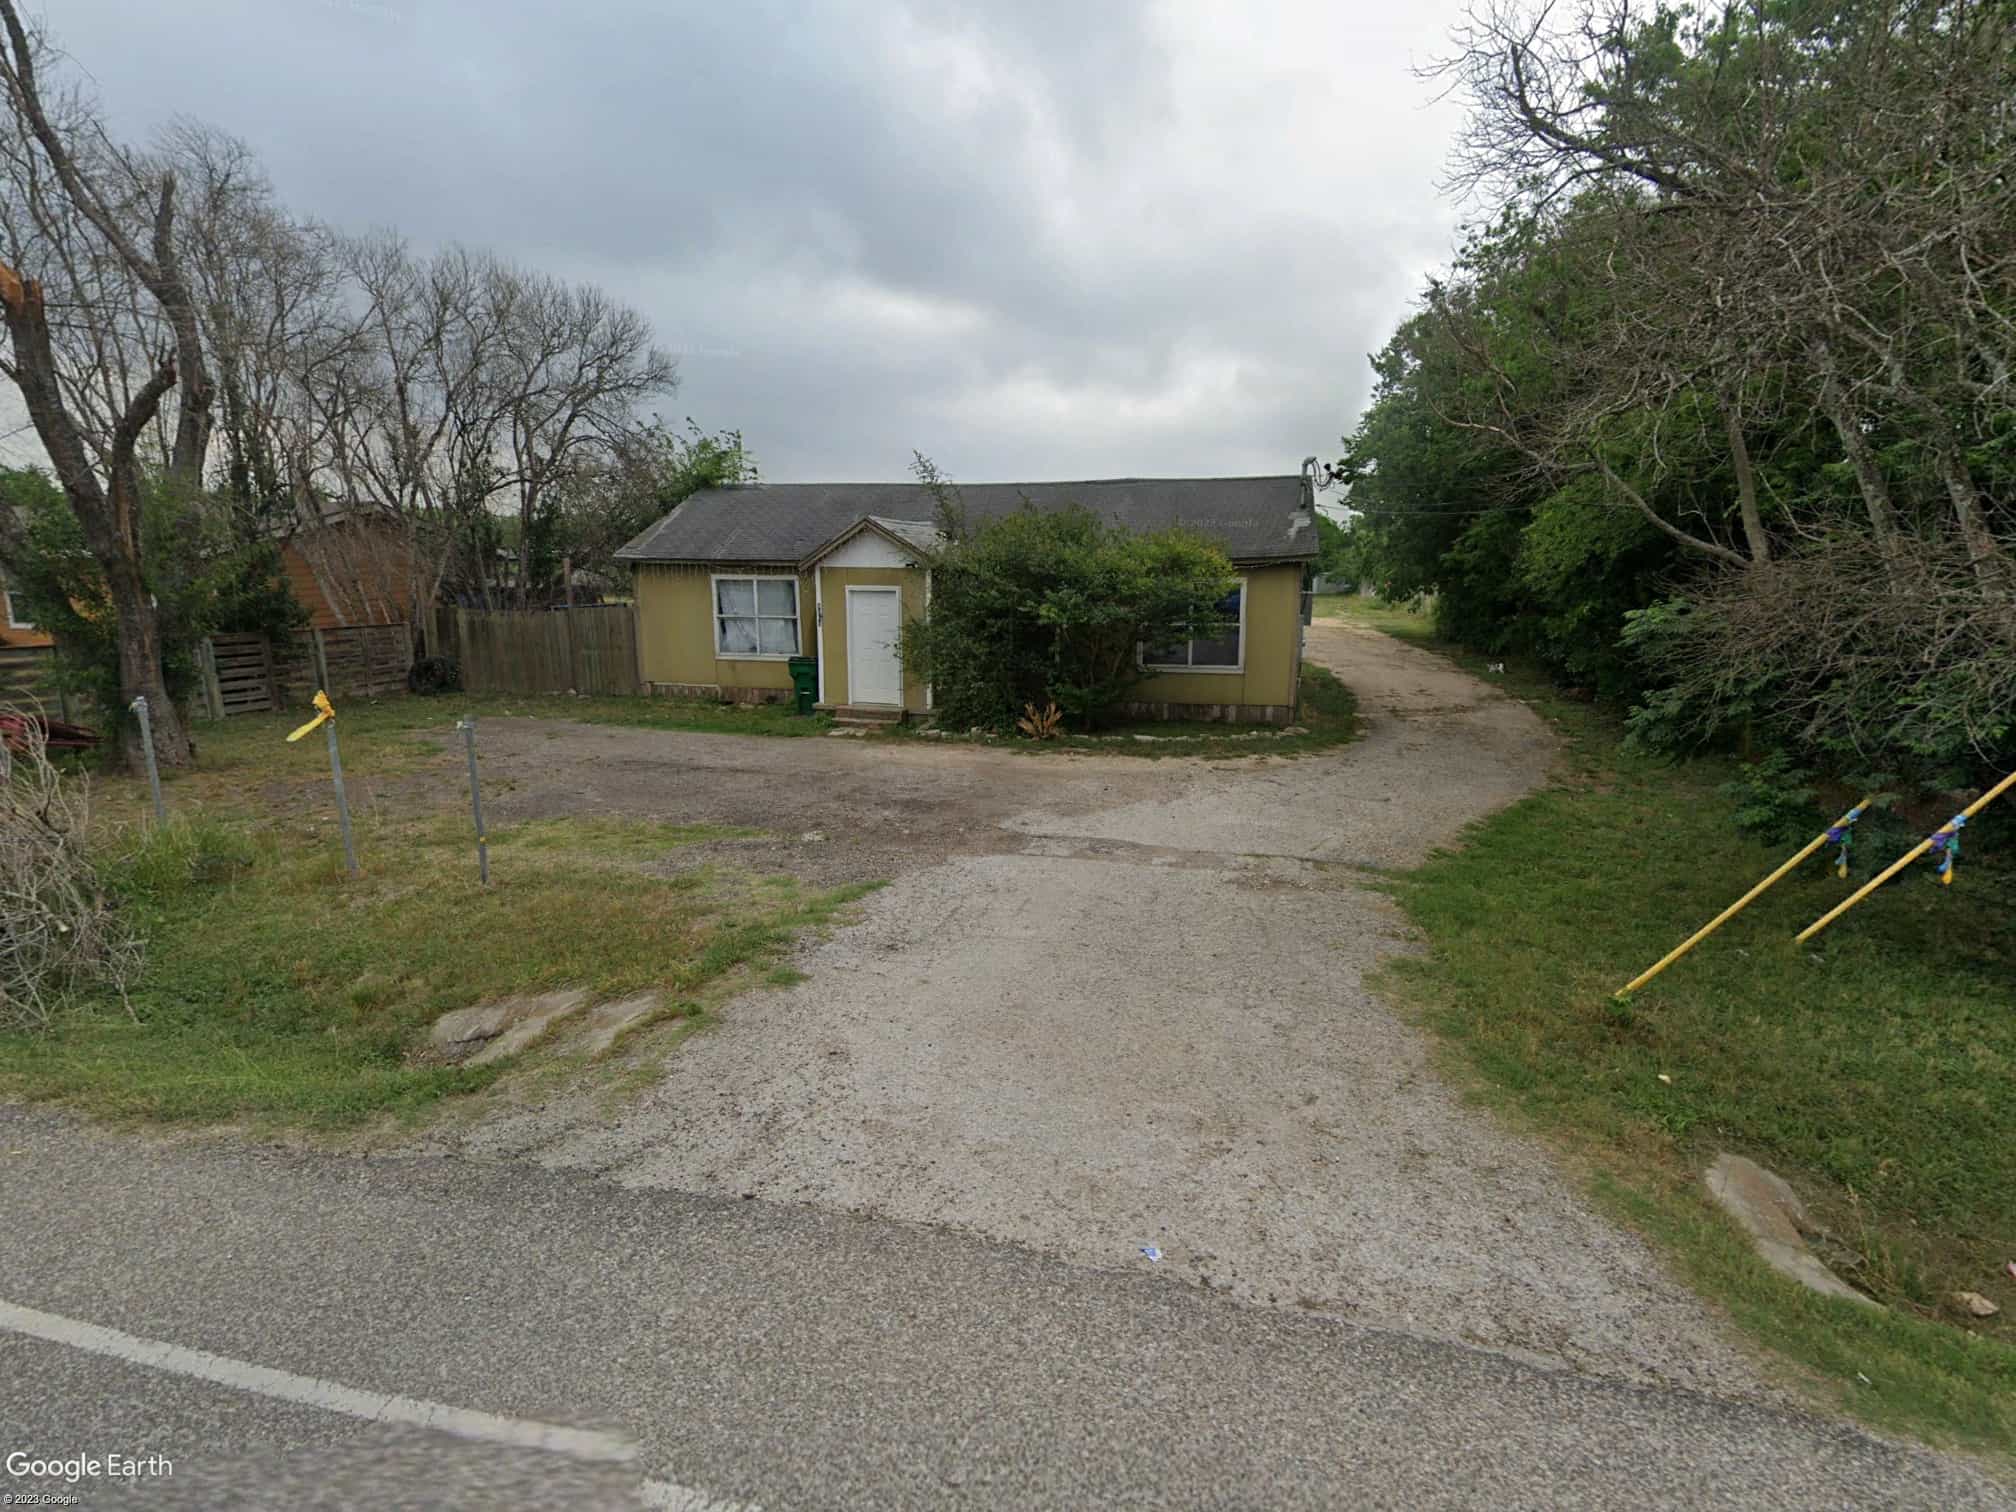 A yellow house, with a driveway down the side, leading to some derelict land which is used for parking during race events